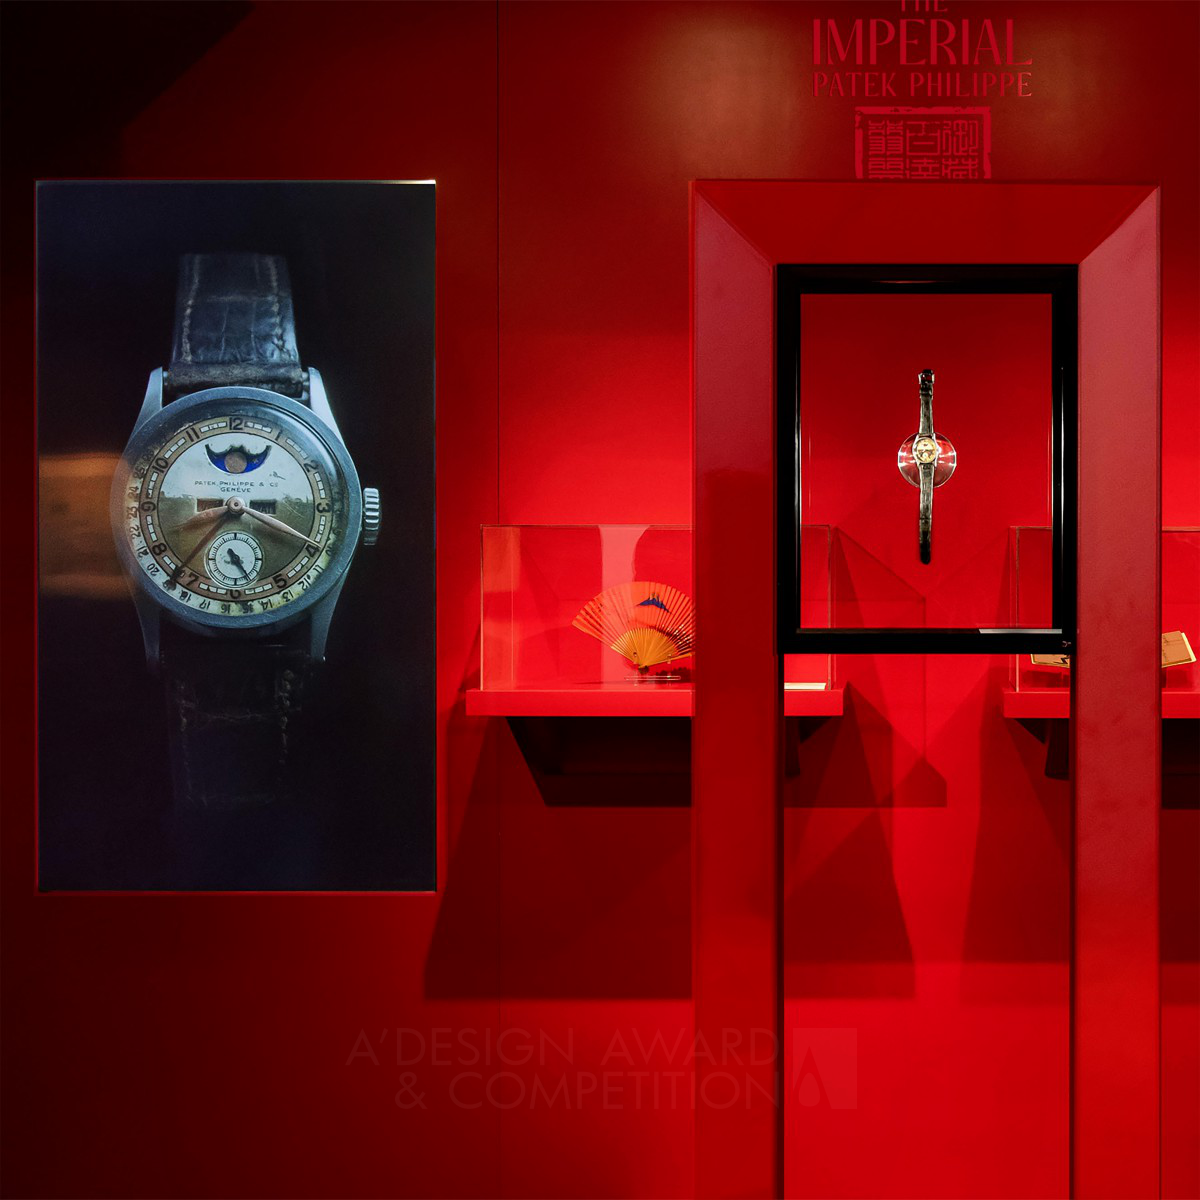 The Imperial Patek Philippe Marketing Campaign